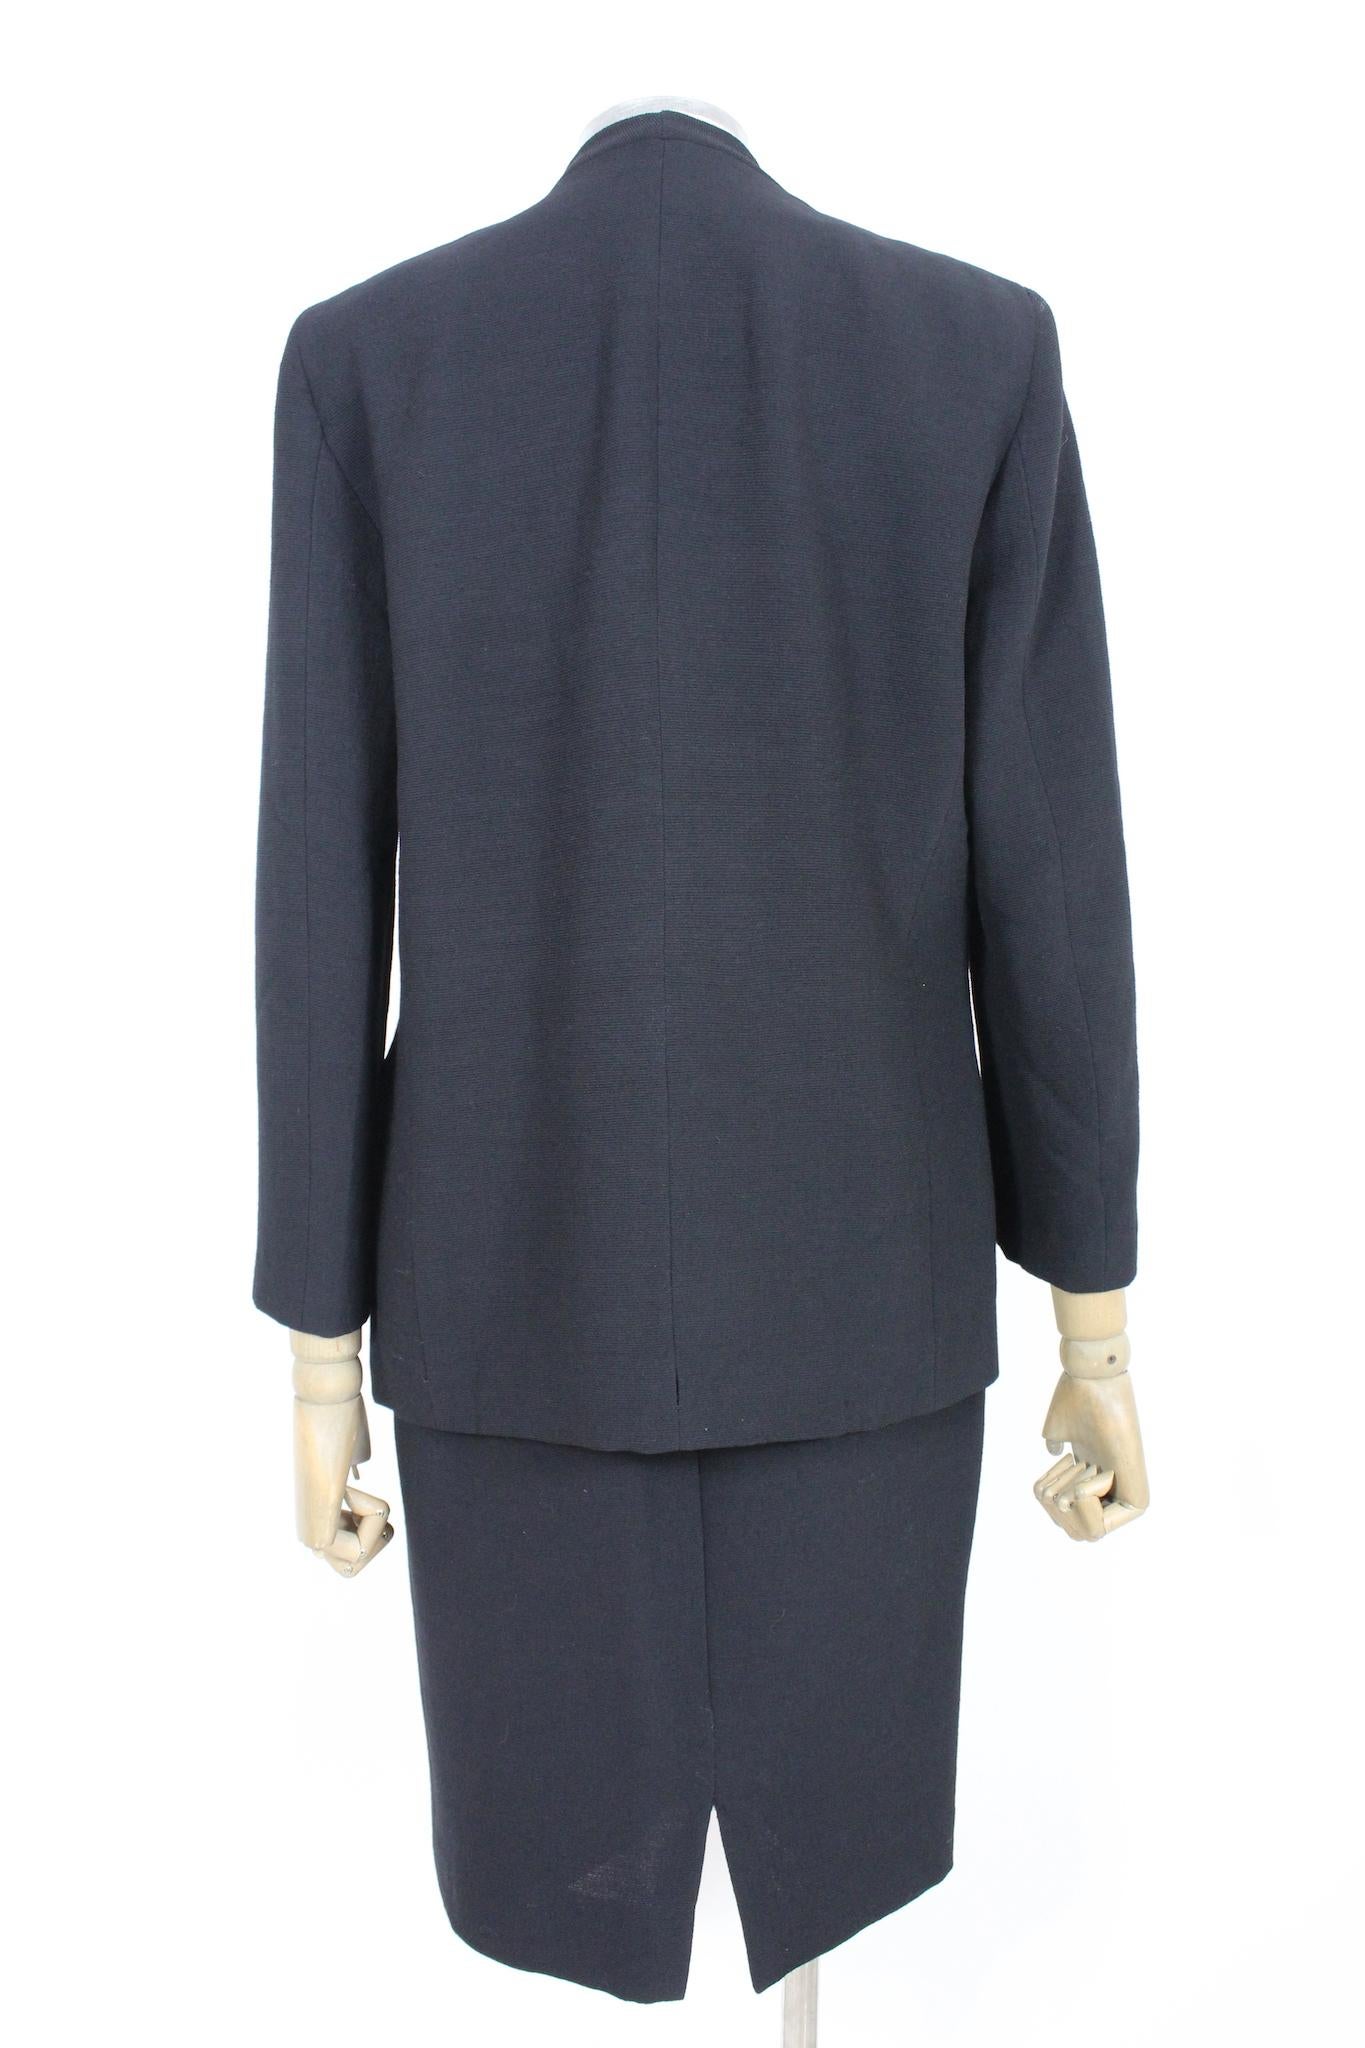 This elegant vintage Pierre Cardin suit is the perfect addition to any woman's wardrobe. The black jacket and skirt are made from a high-quality wool fabric and feature an embroidered button detail. The vintage 80s design is perfect for any evening